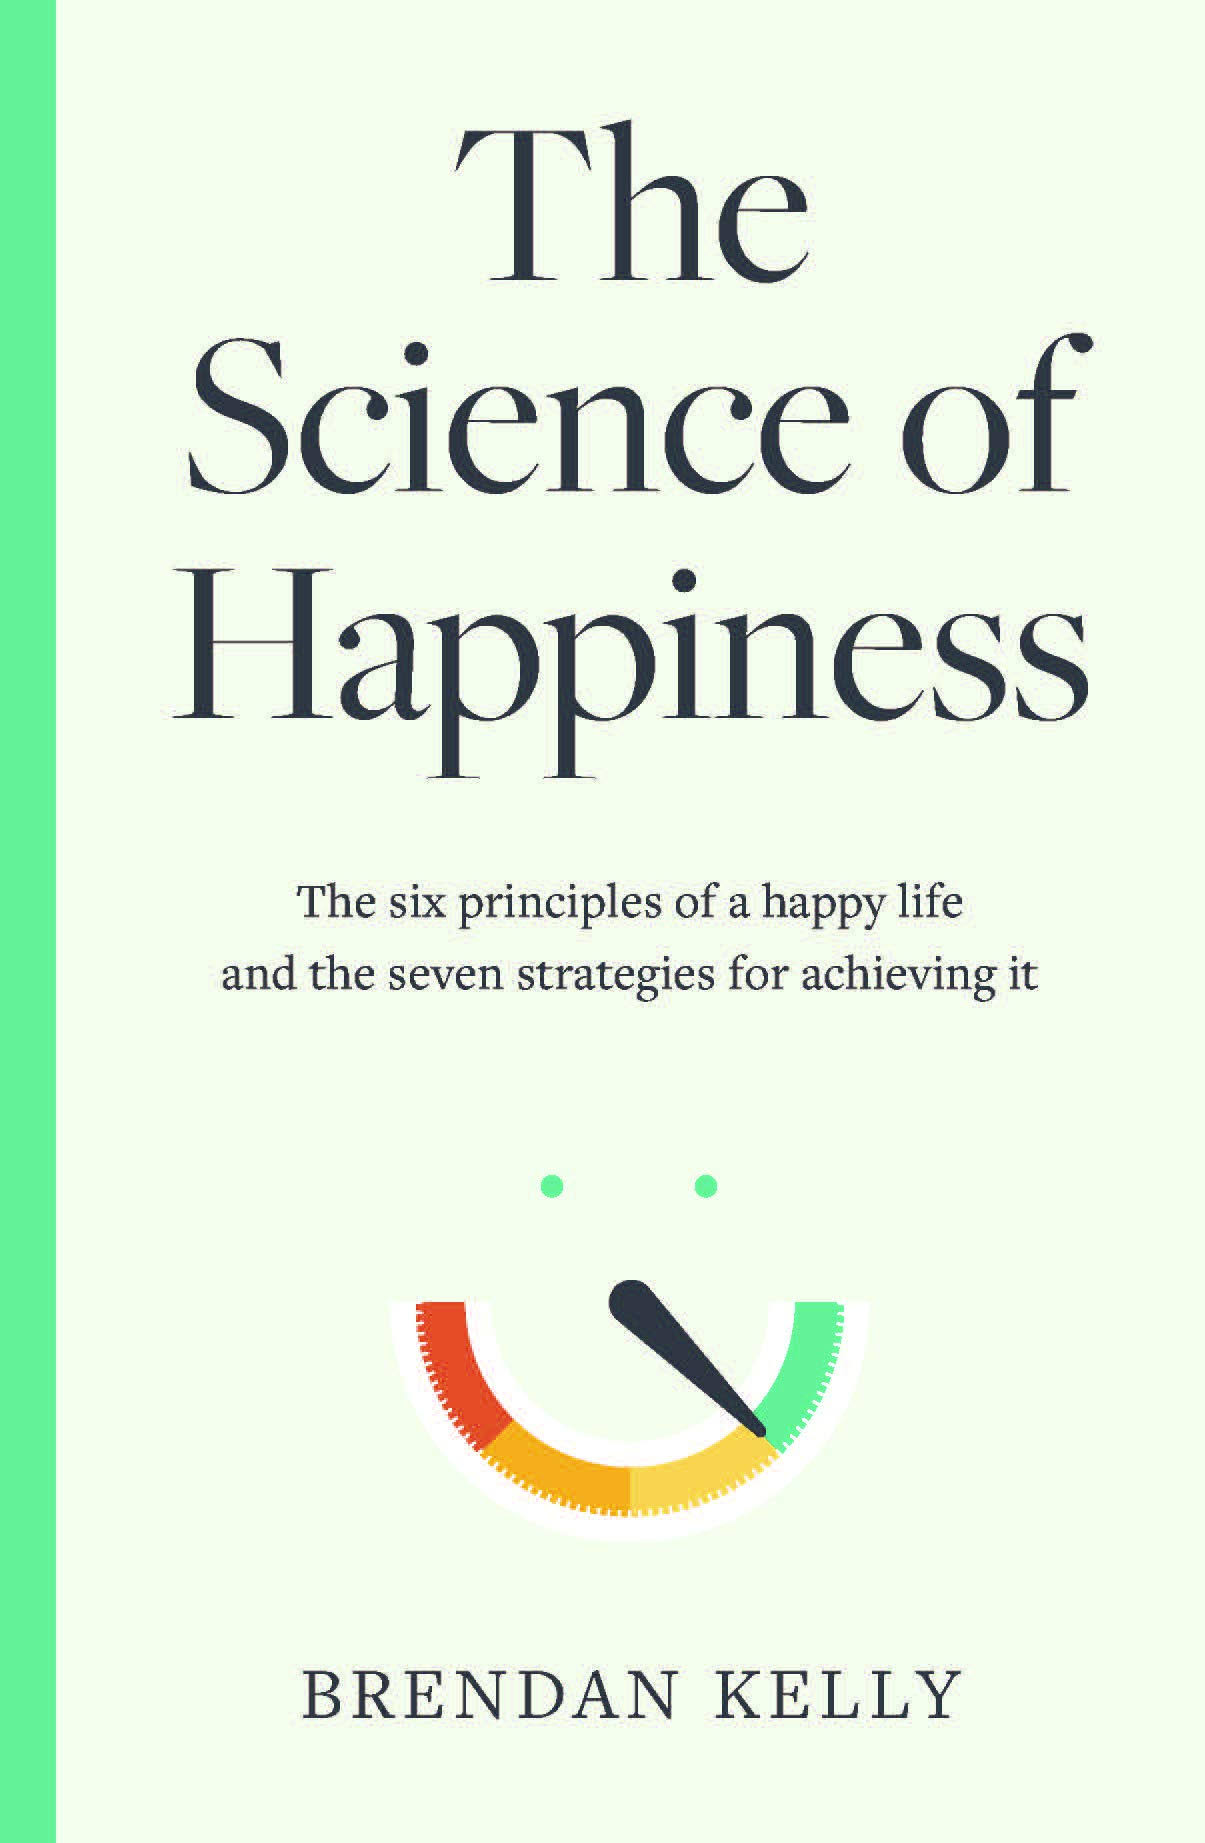 The Science of Happiness: The Six Principles of a Happy Life and the Seven Strategies for Achieving it [Book]